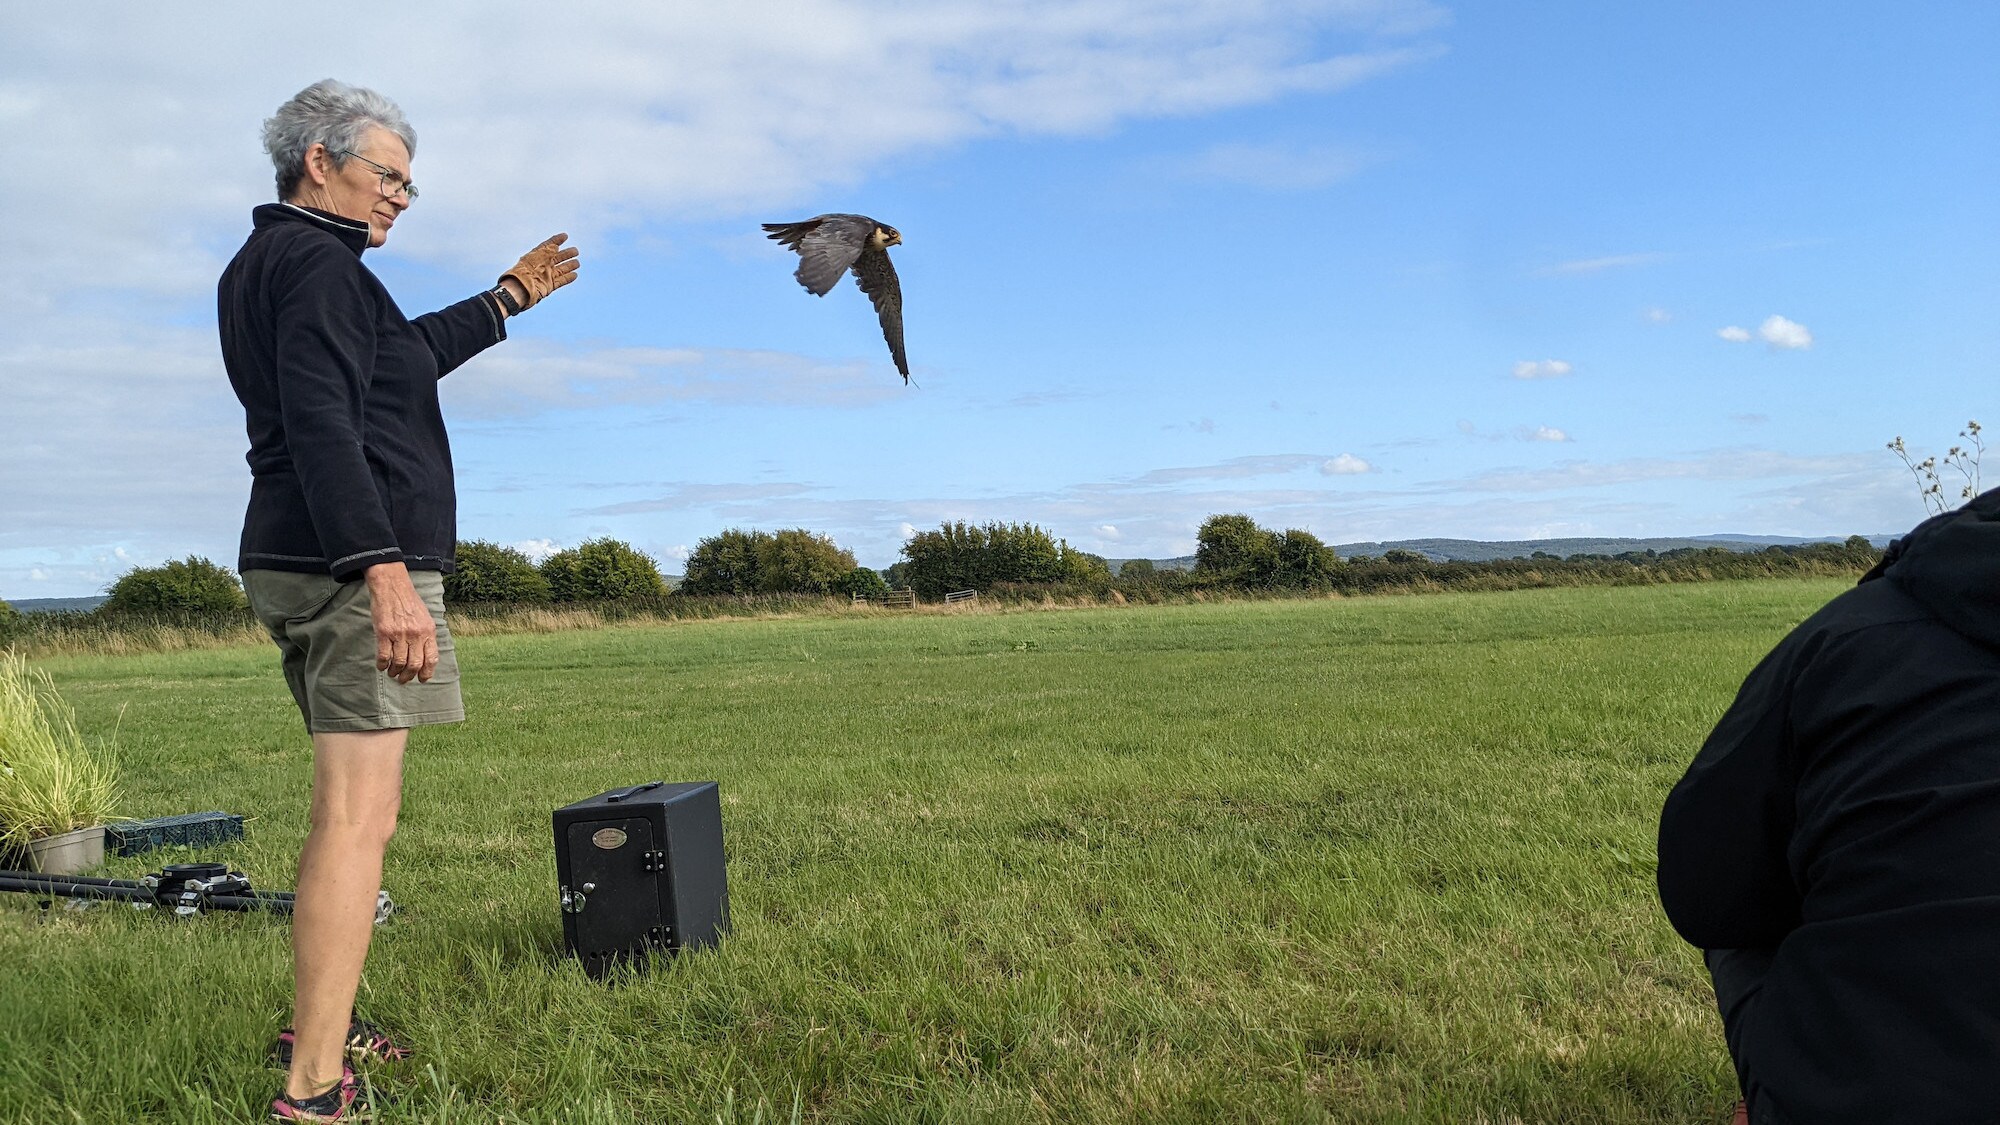 Hobby wrangler Rose Buck releases her trained hobby "Henry" during a photo shoot set outdoors at Elm Farm in Tickenham, Clevedon, UK for "The Busy Farm" episode of "A Real Bug's Life." (National Geographic/Nathan Small)